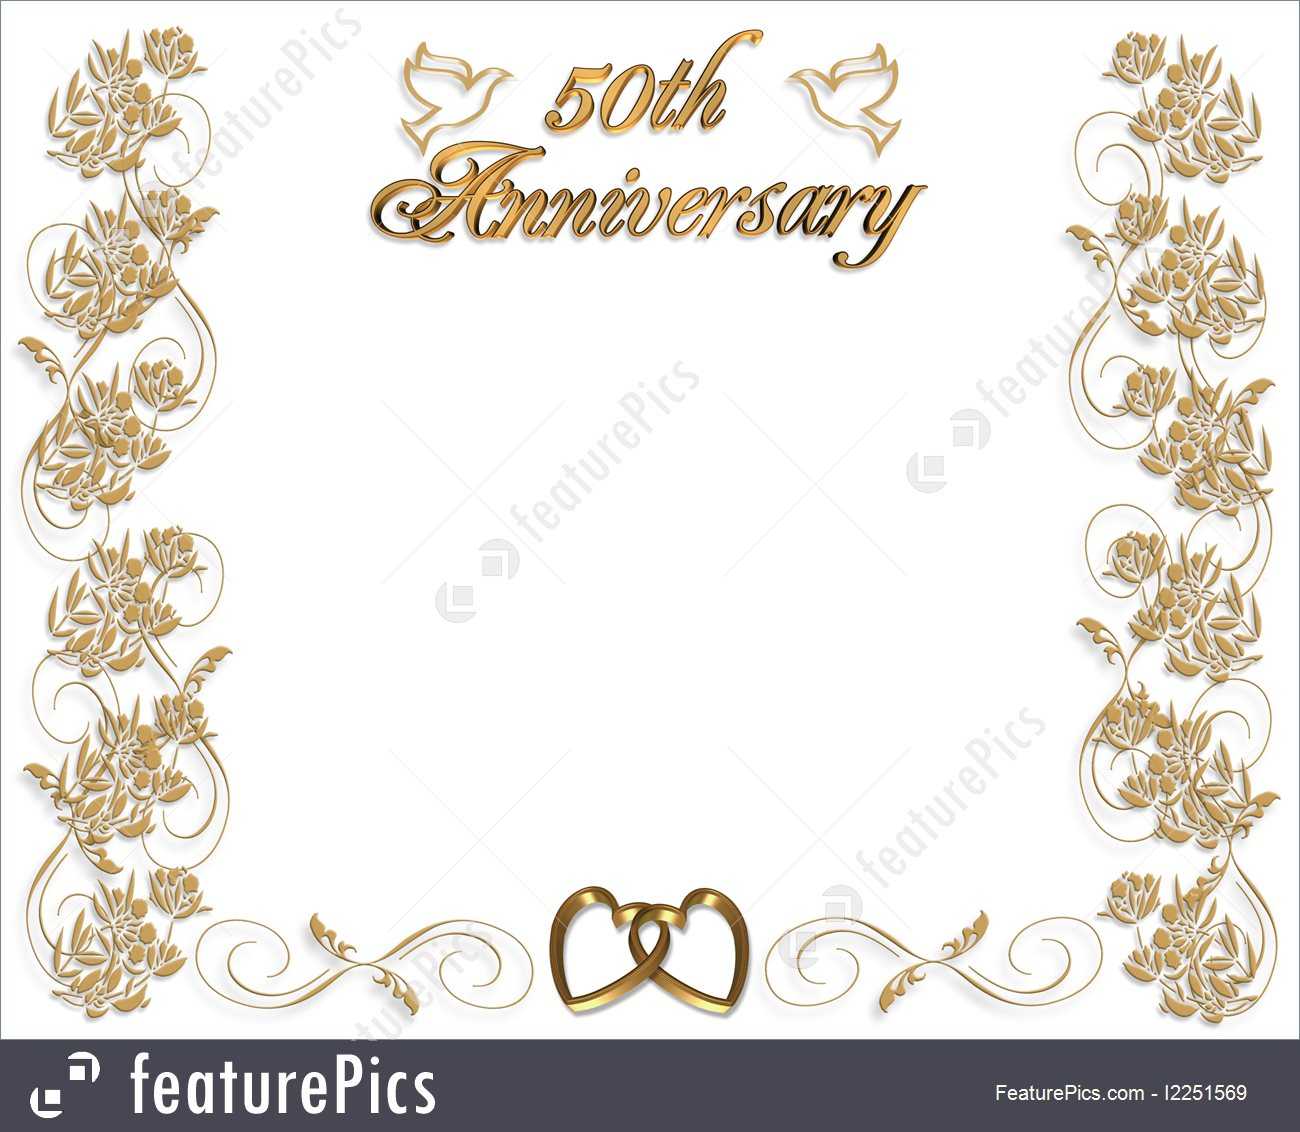 Templates: Wedding Anniversary Invitation 50 Years – Stock Illustration  I2251569 At Featurepics Inside Template For Anniversary Card